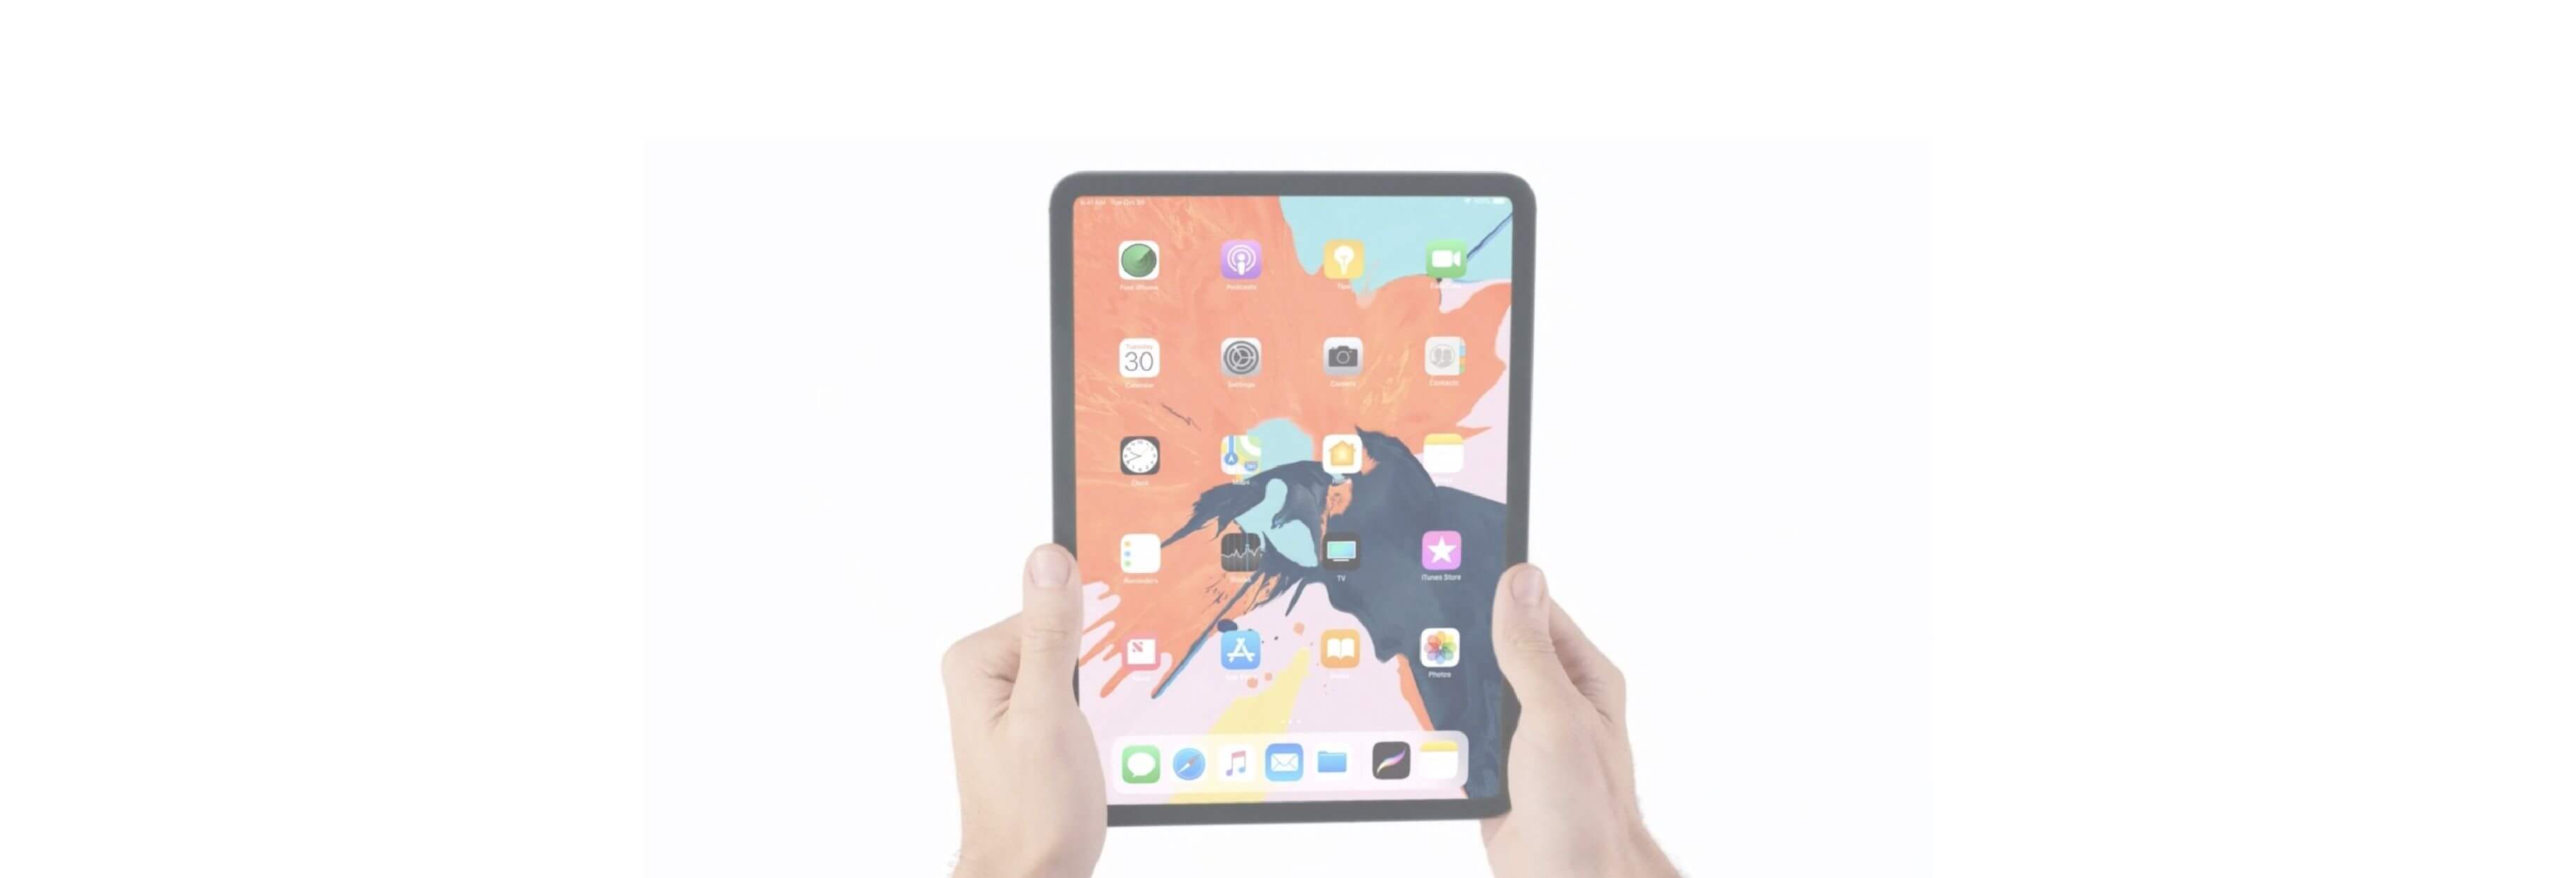 How to take a screenshot with the iPad Pro (2018)